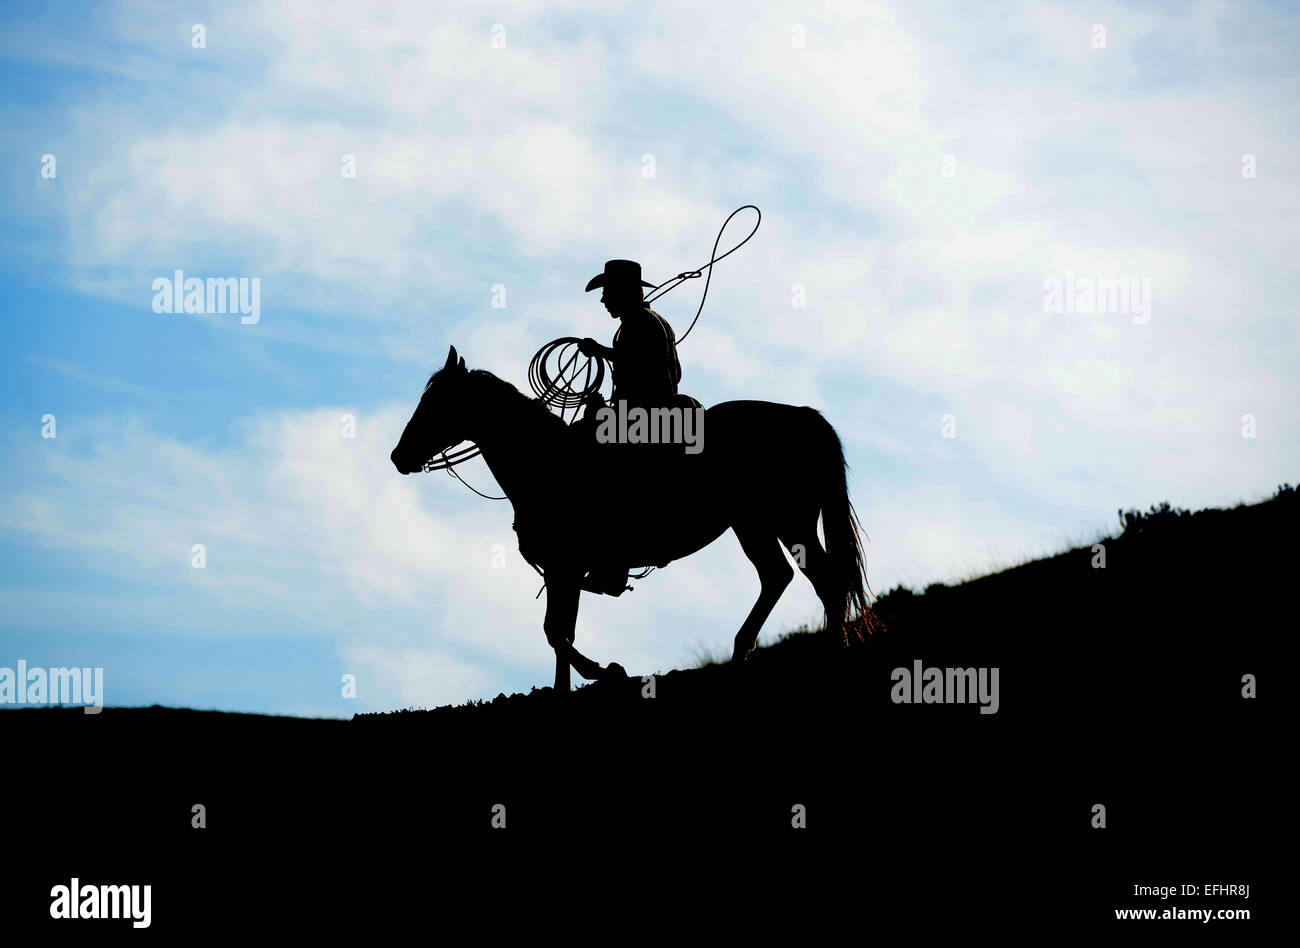 Cowboy on horseback silhouetted with lasso. Silhouette of cowboy on a horse Stock Photo